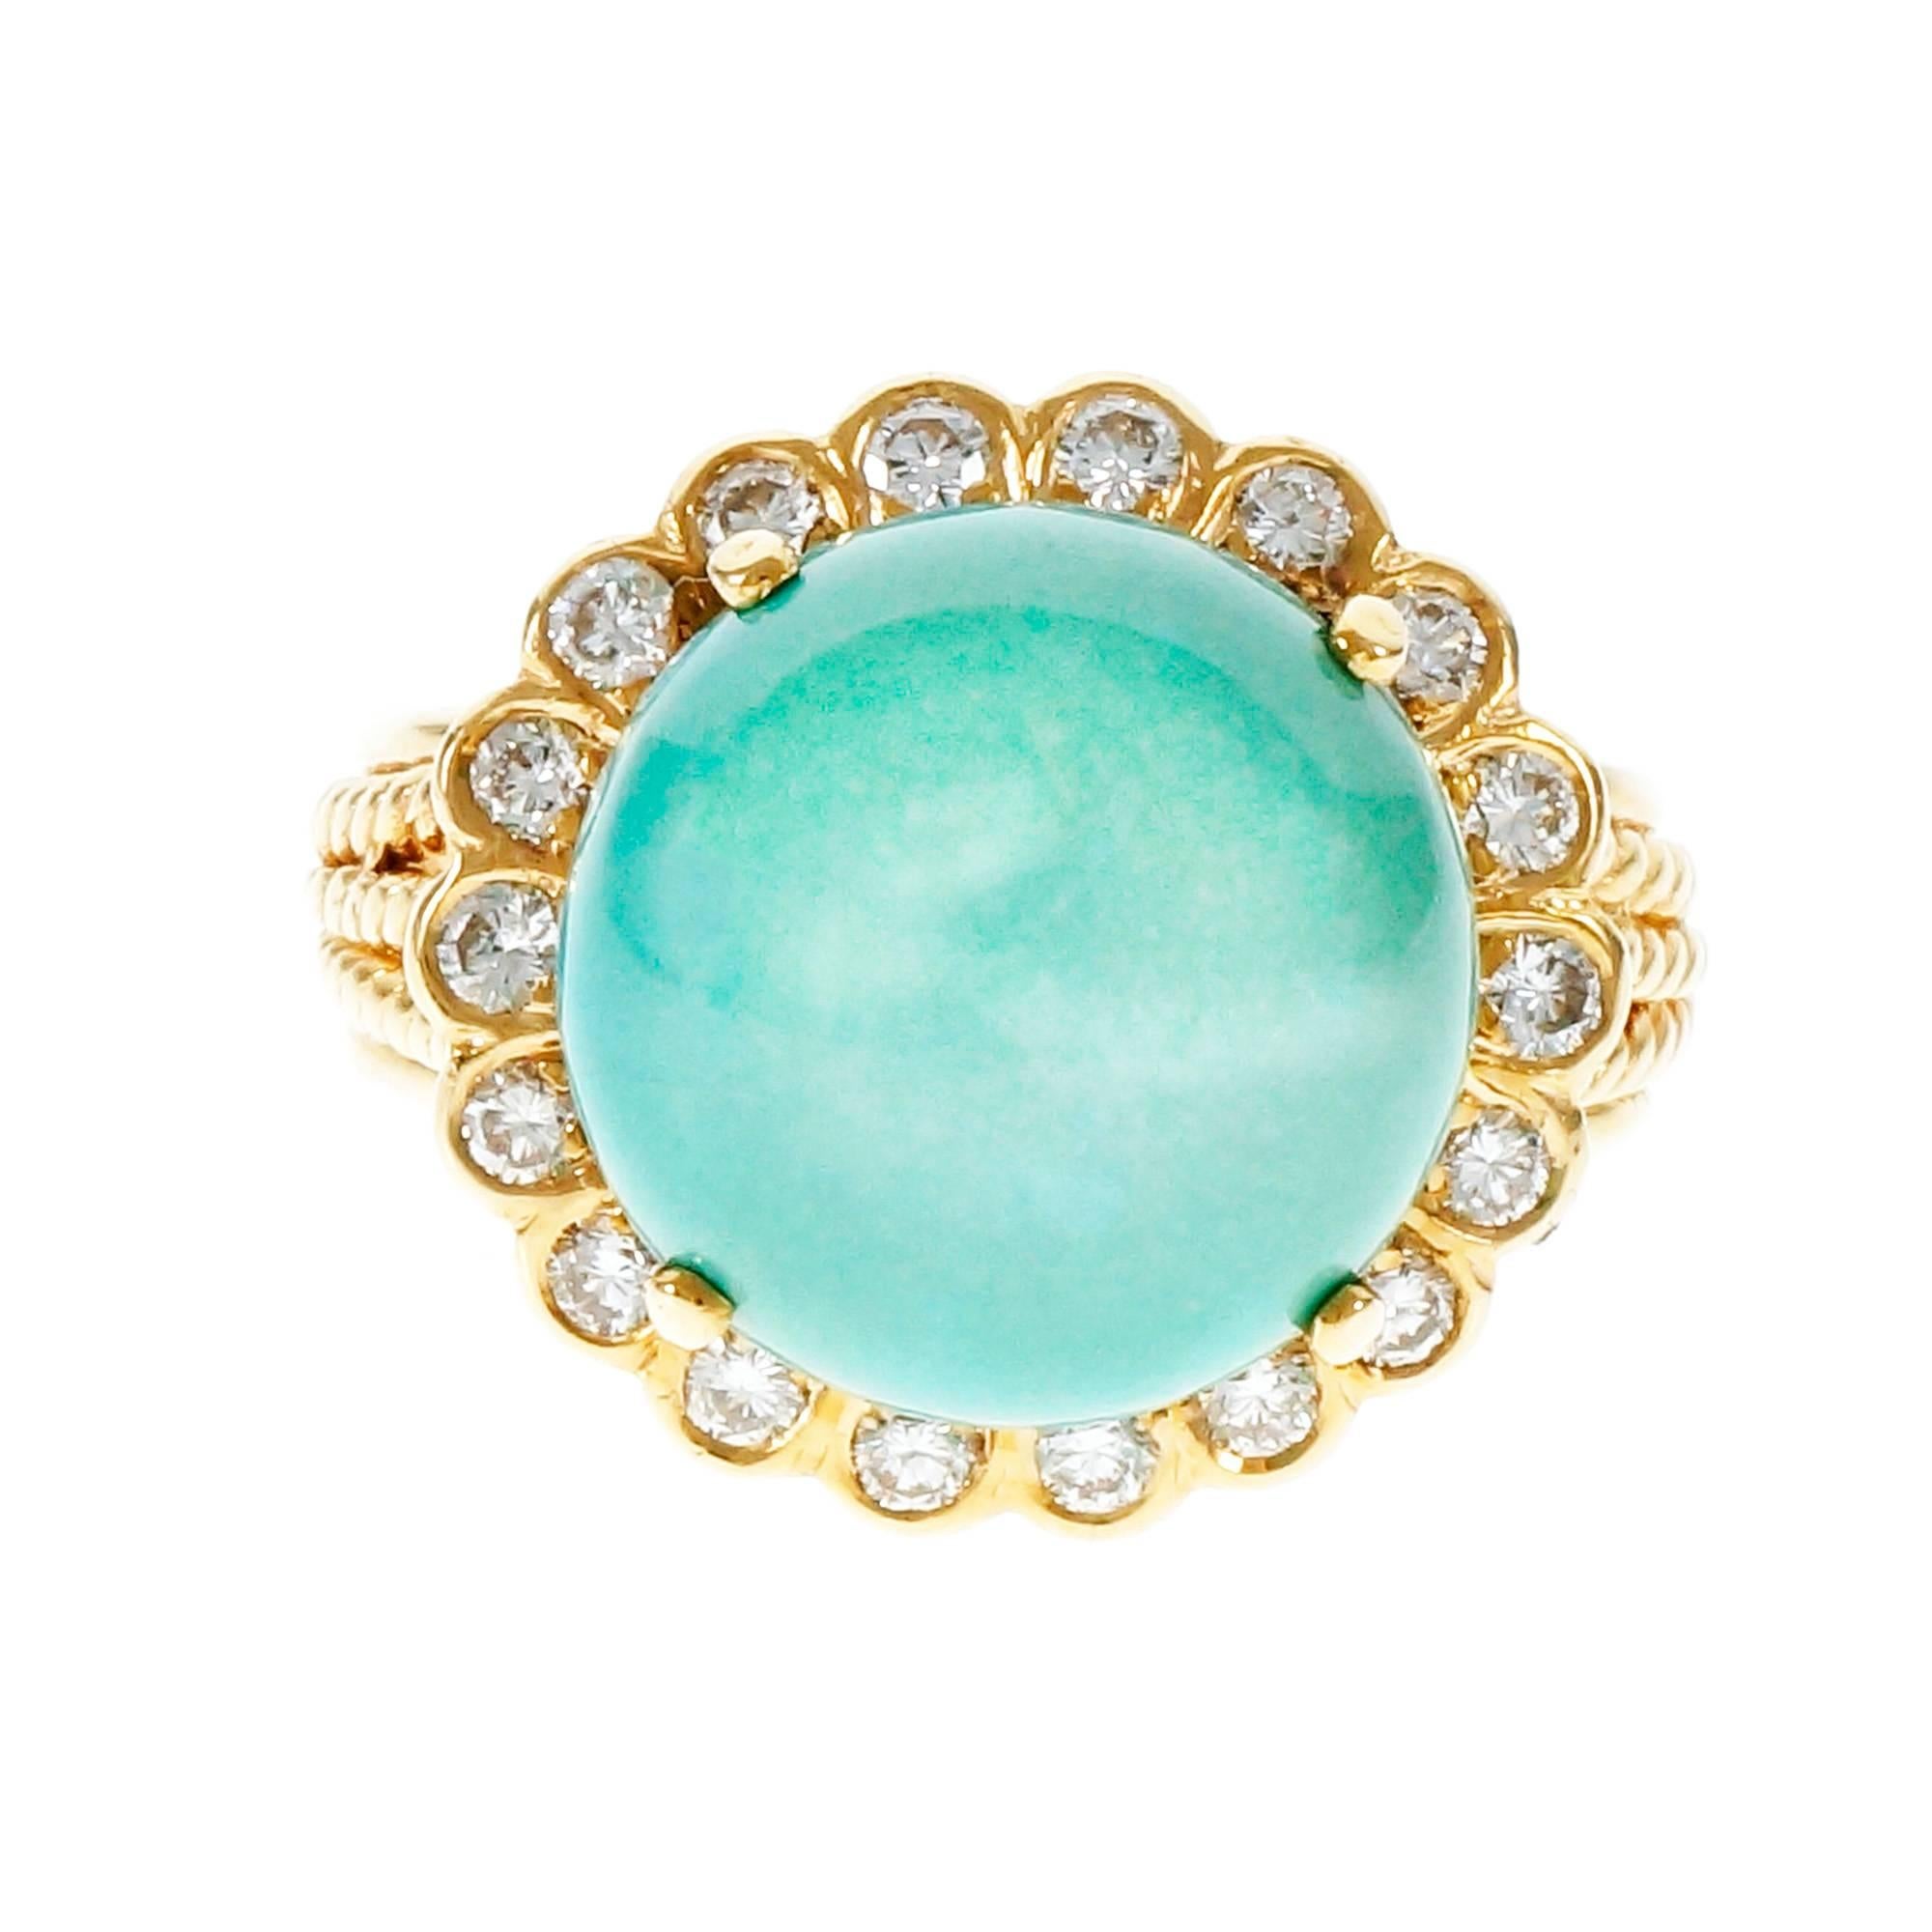 Vintage 1950-1960 7.00ct Turquoise Diamond ring with bright sparkly Diamond accents. The Turquoise has natural color with Polymer coating for lustré enhancement.

1 round cabochon blue Turquoise, approx. total weight 7.07cts, 13mm
18 round Diamonds,